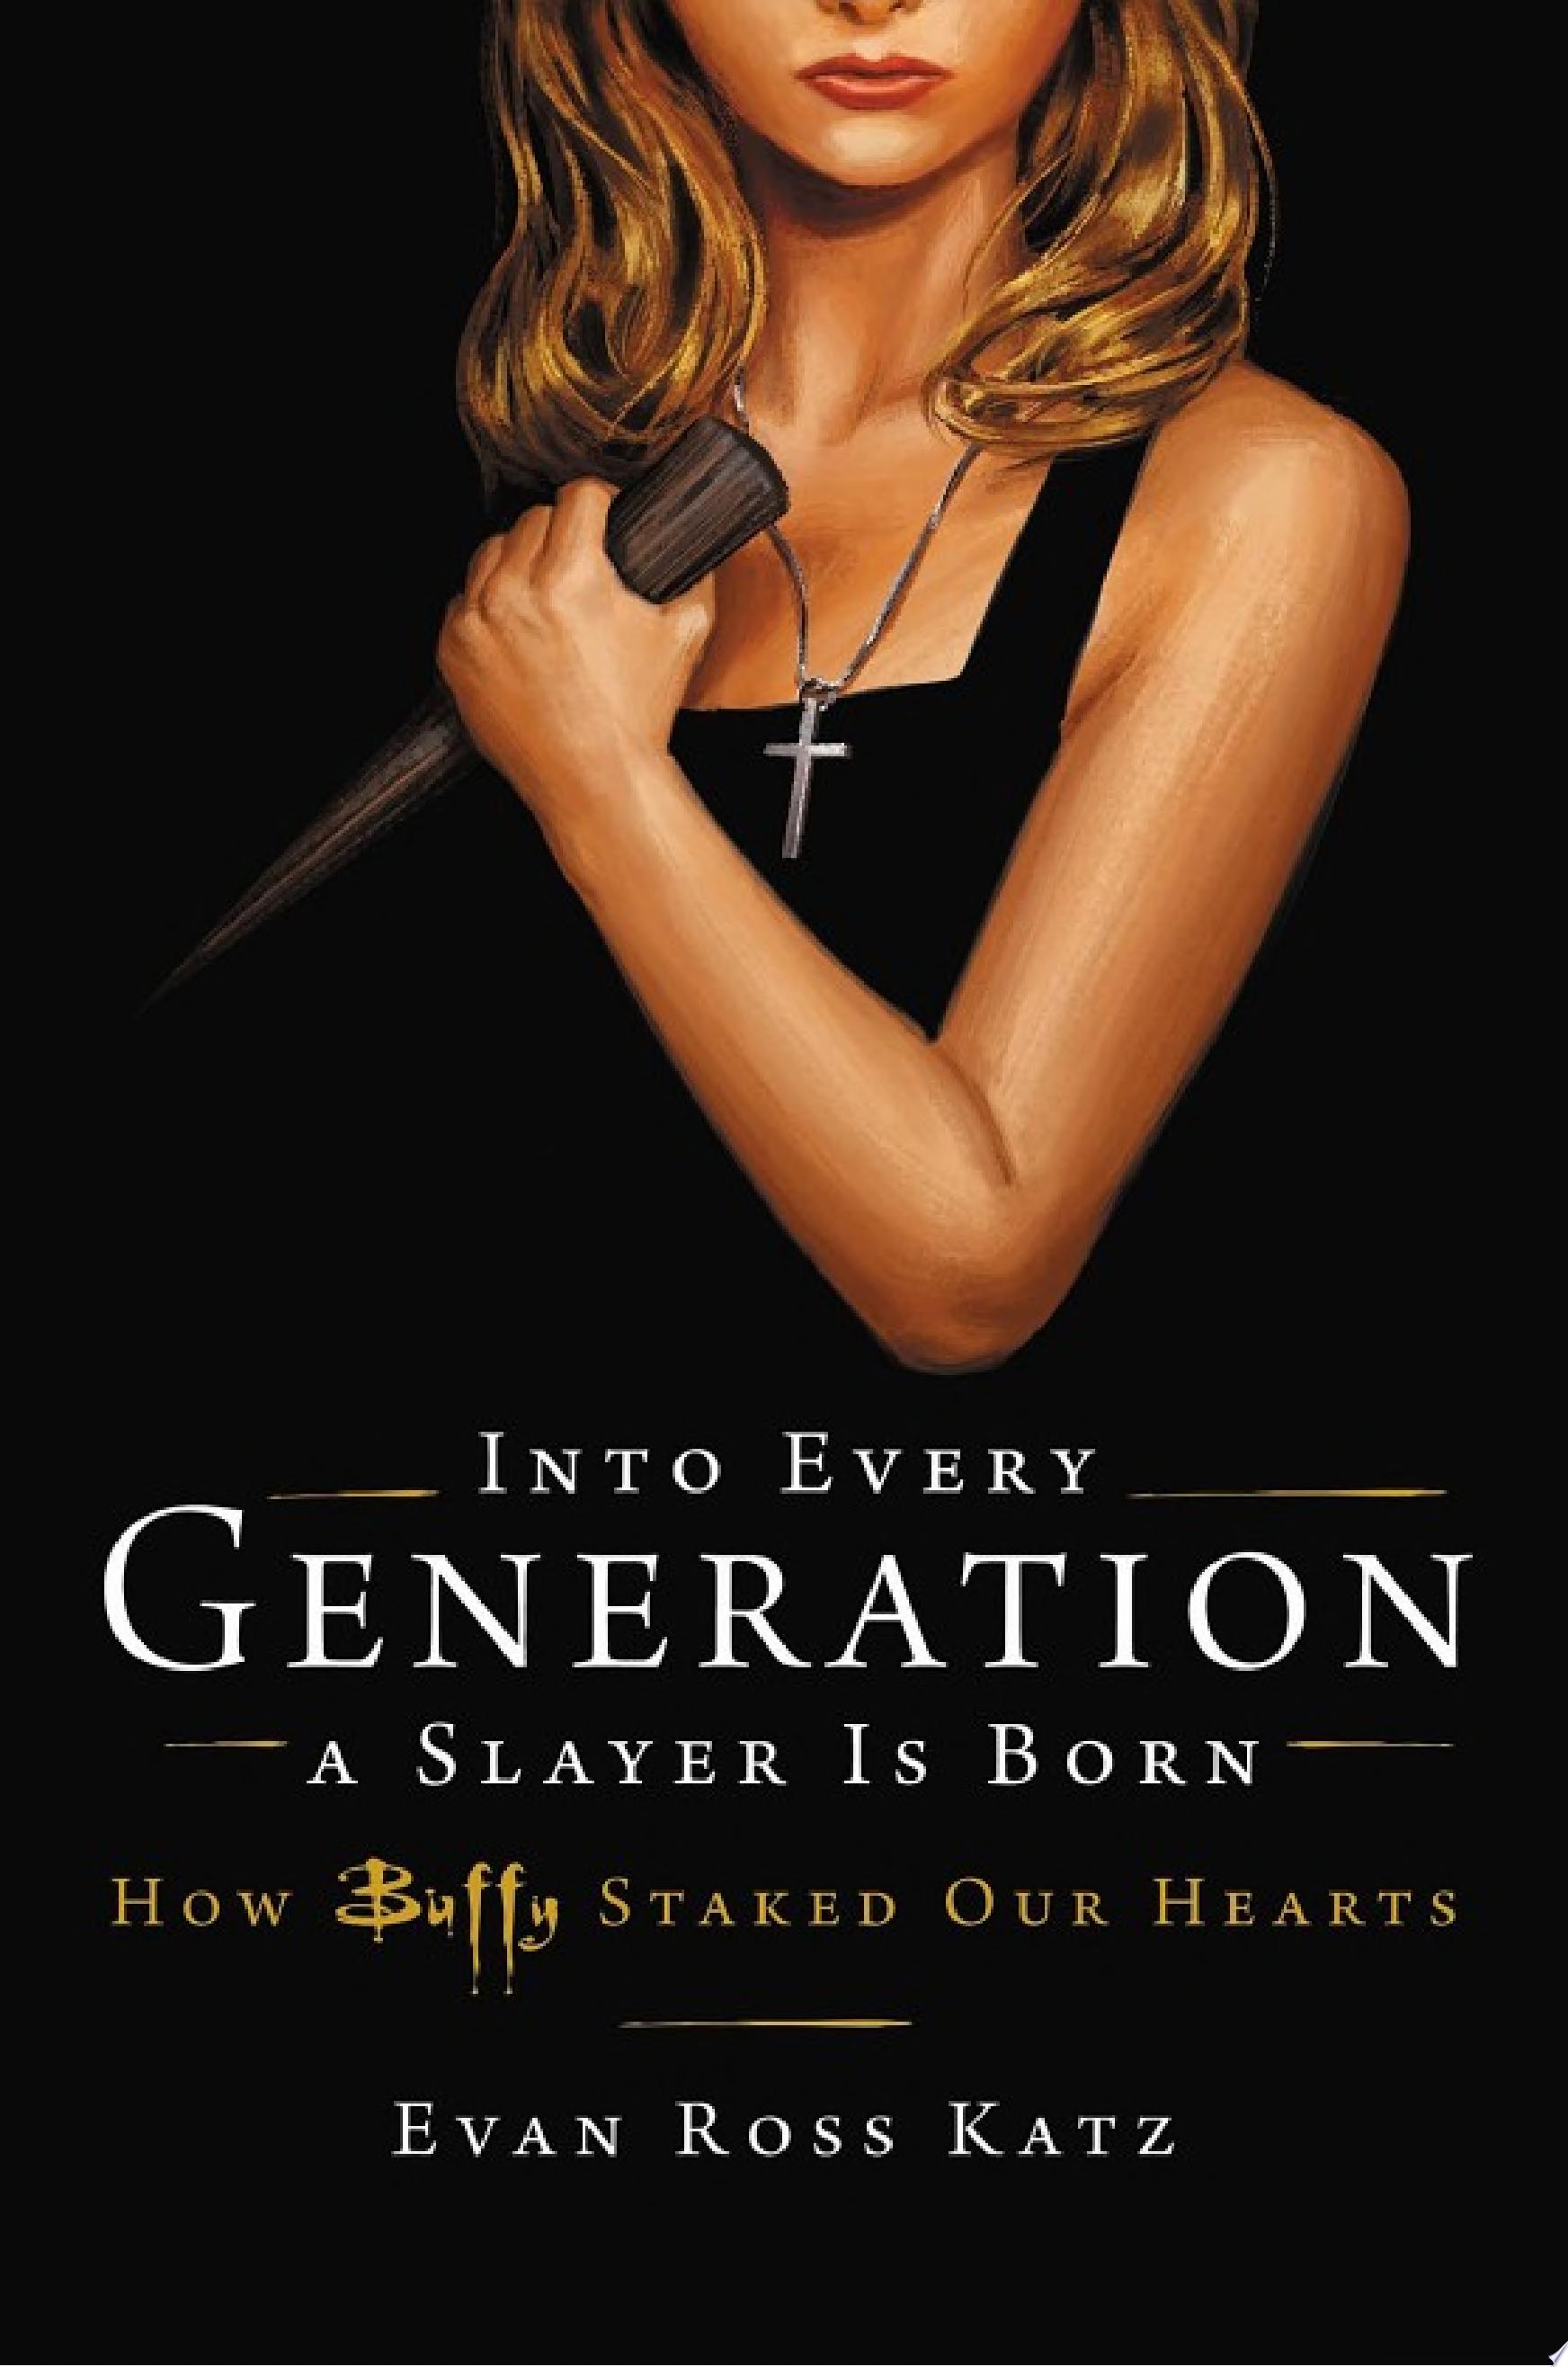 Image for "Into Every Generation a Slayer Is Born"